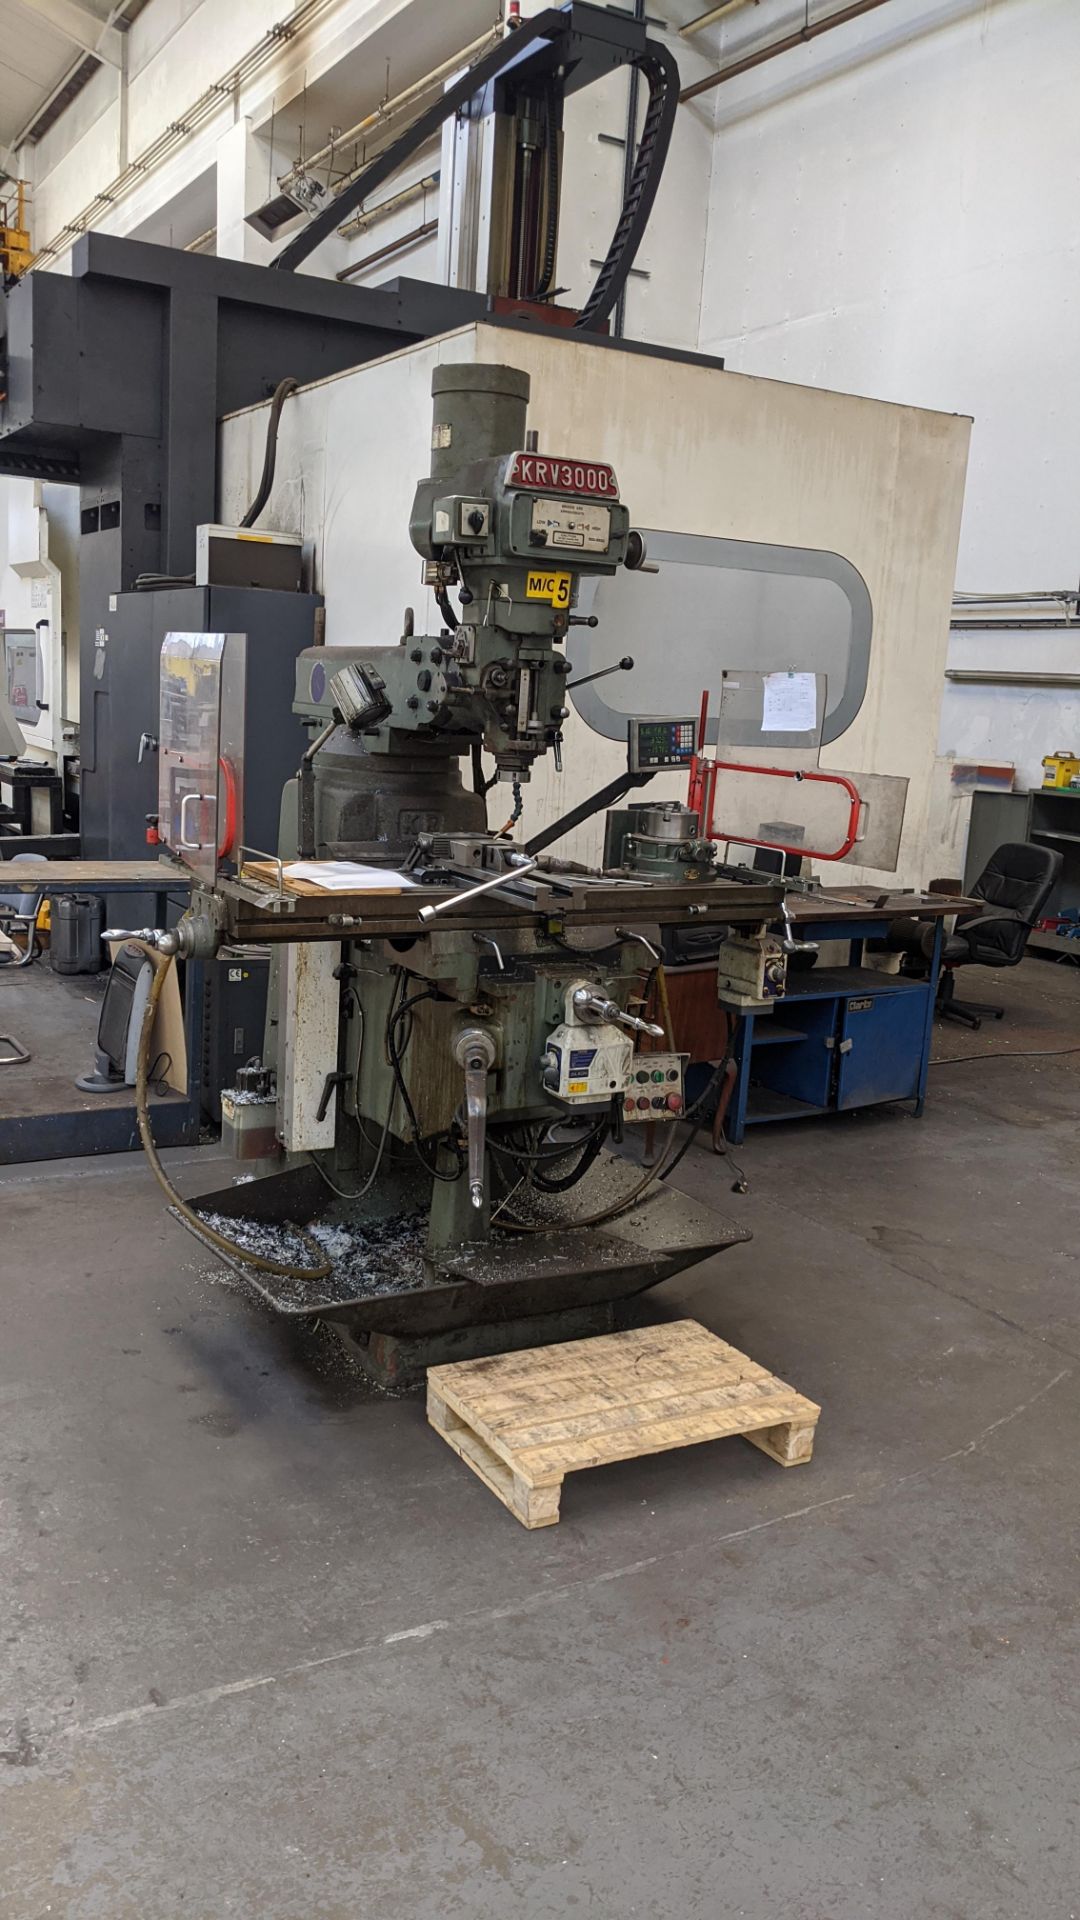 1998 King Rich KRV3000-V milling machine, serial no. 8470. Includes Newall Topaz Mill controller. - Image 3 of 15